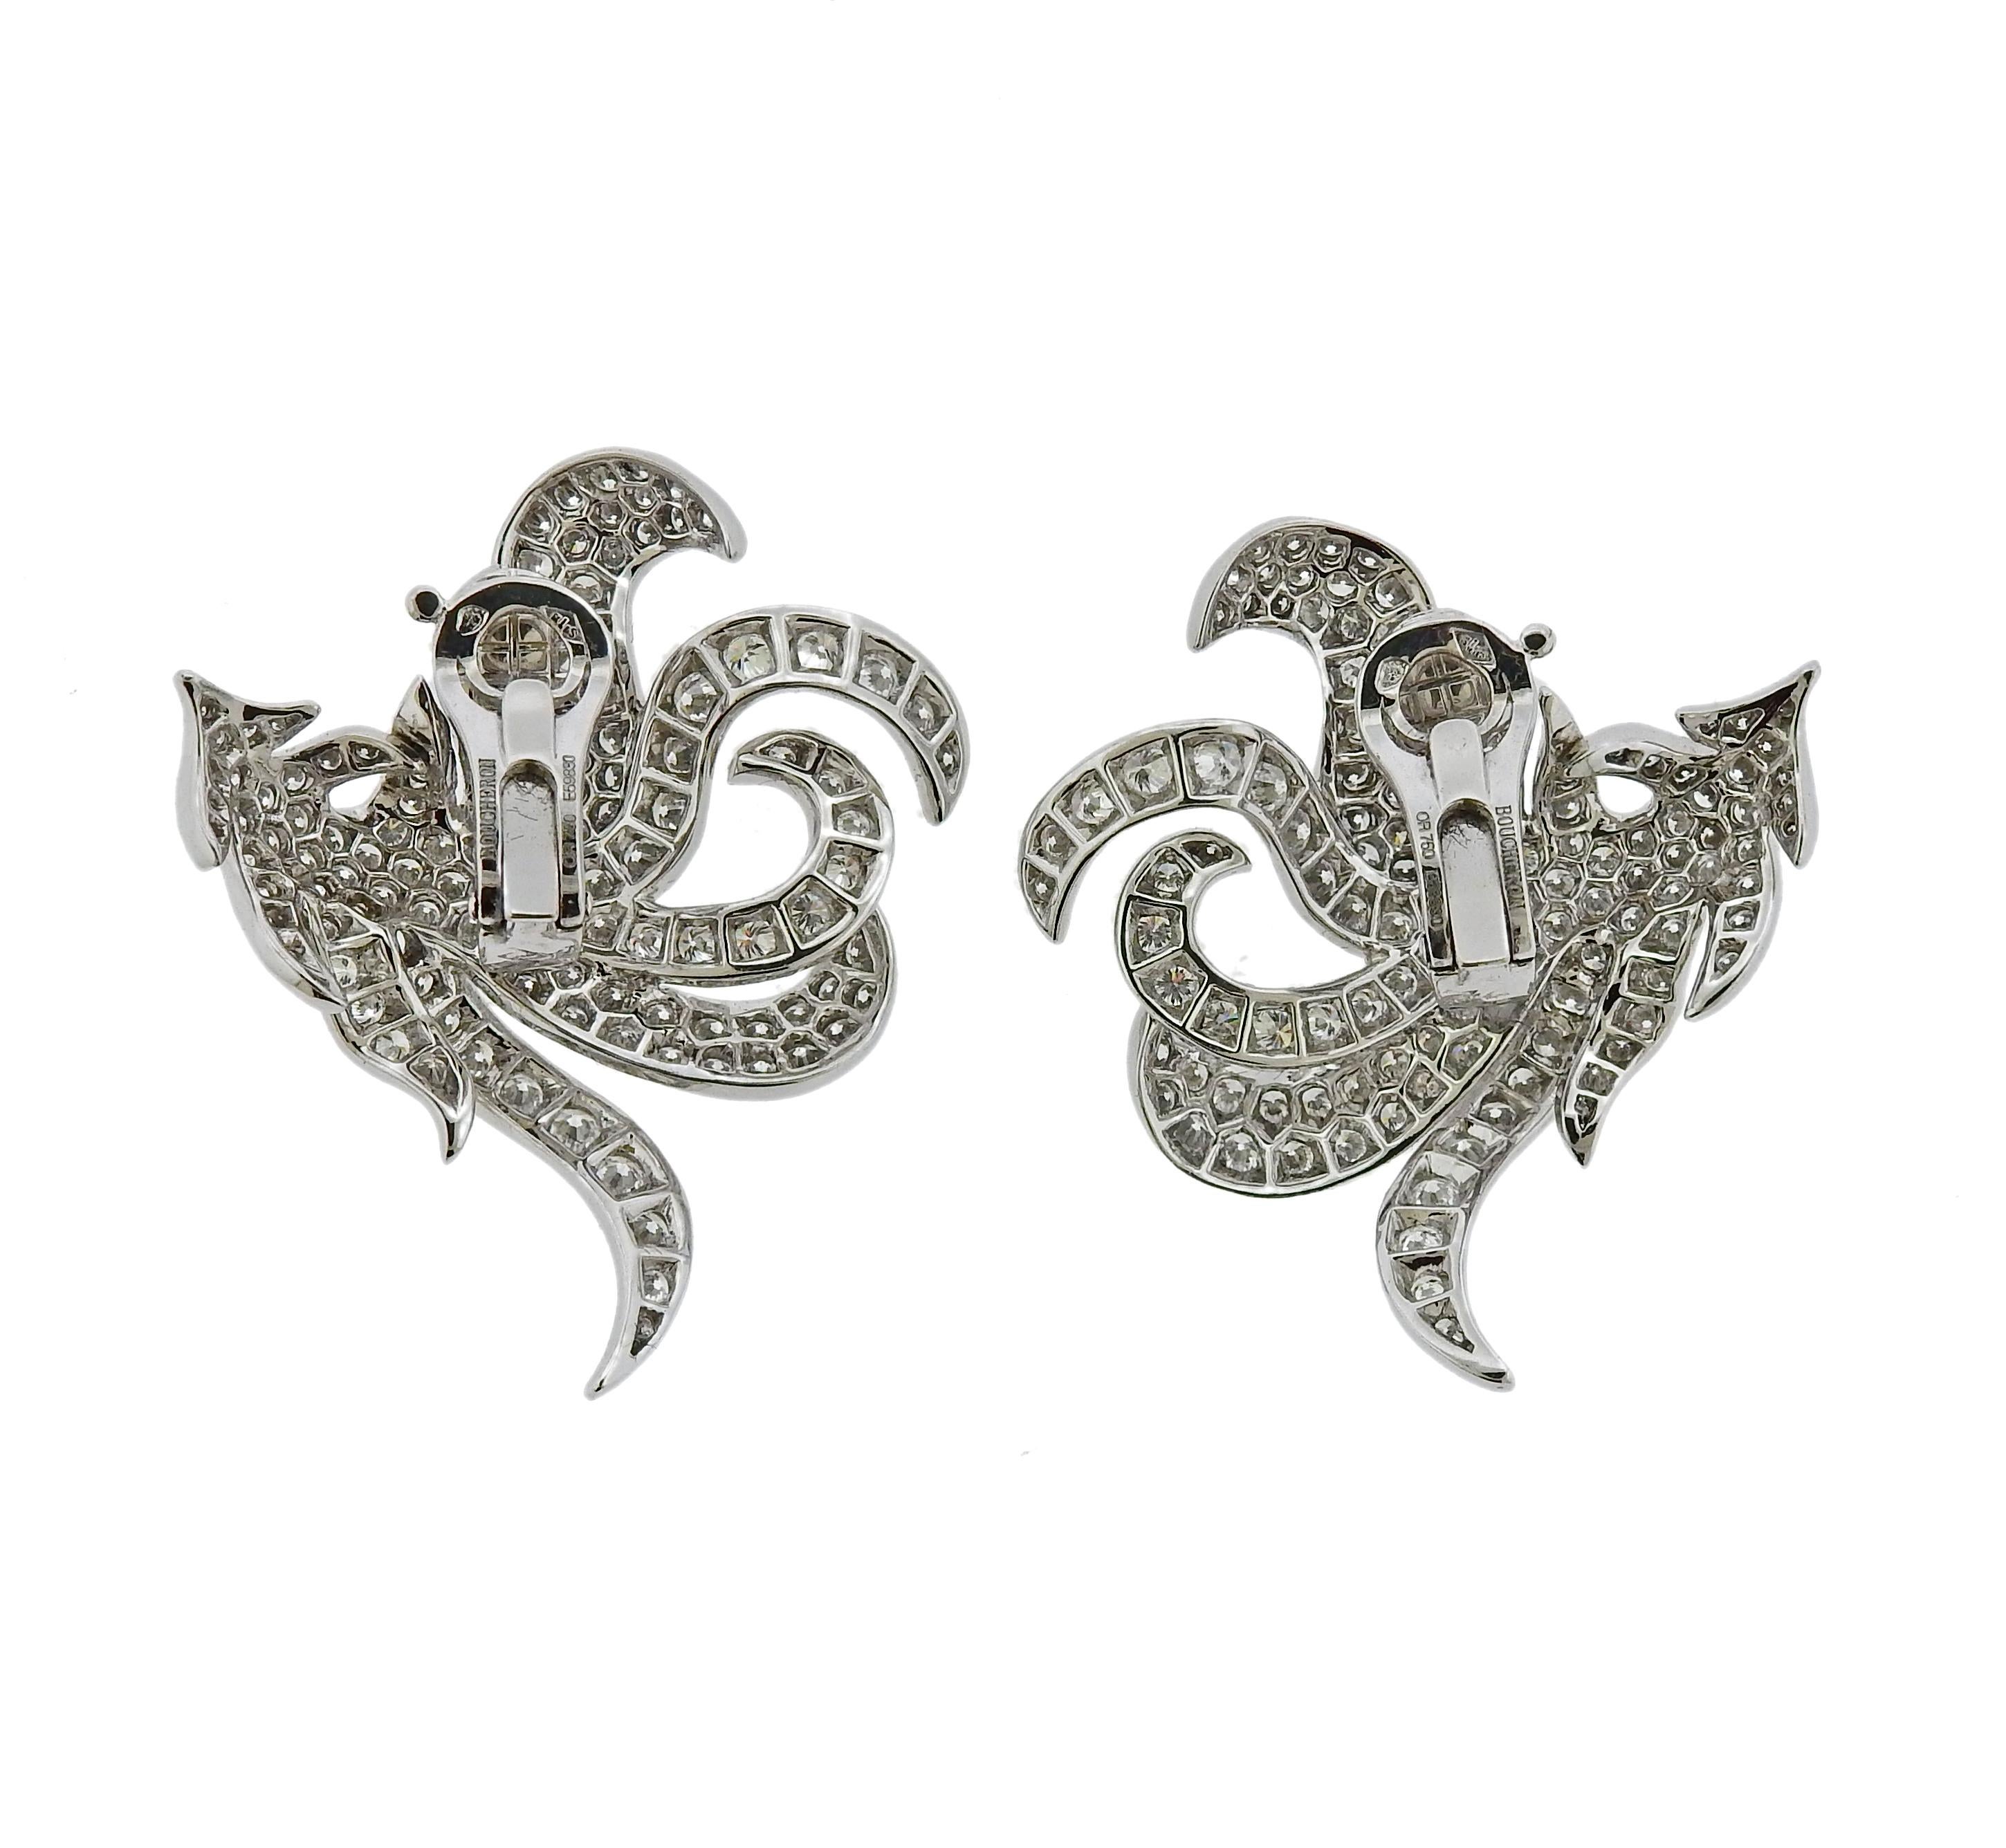 Pair of exquisite Boucheron 18k white gold cocktail earrings, set with a total of approximately 7.50cts in FG/VVS-VS diamonds. Earrings are measured 42mm x 33mm. Weight is 26.2 grams. Marked: Boucheron, or750,559830, French marks.